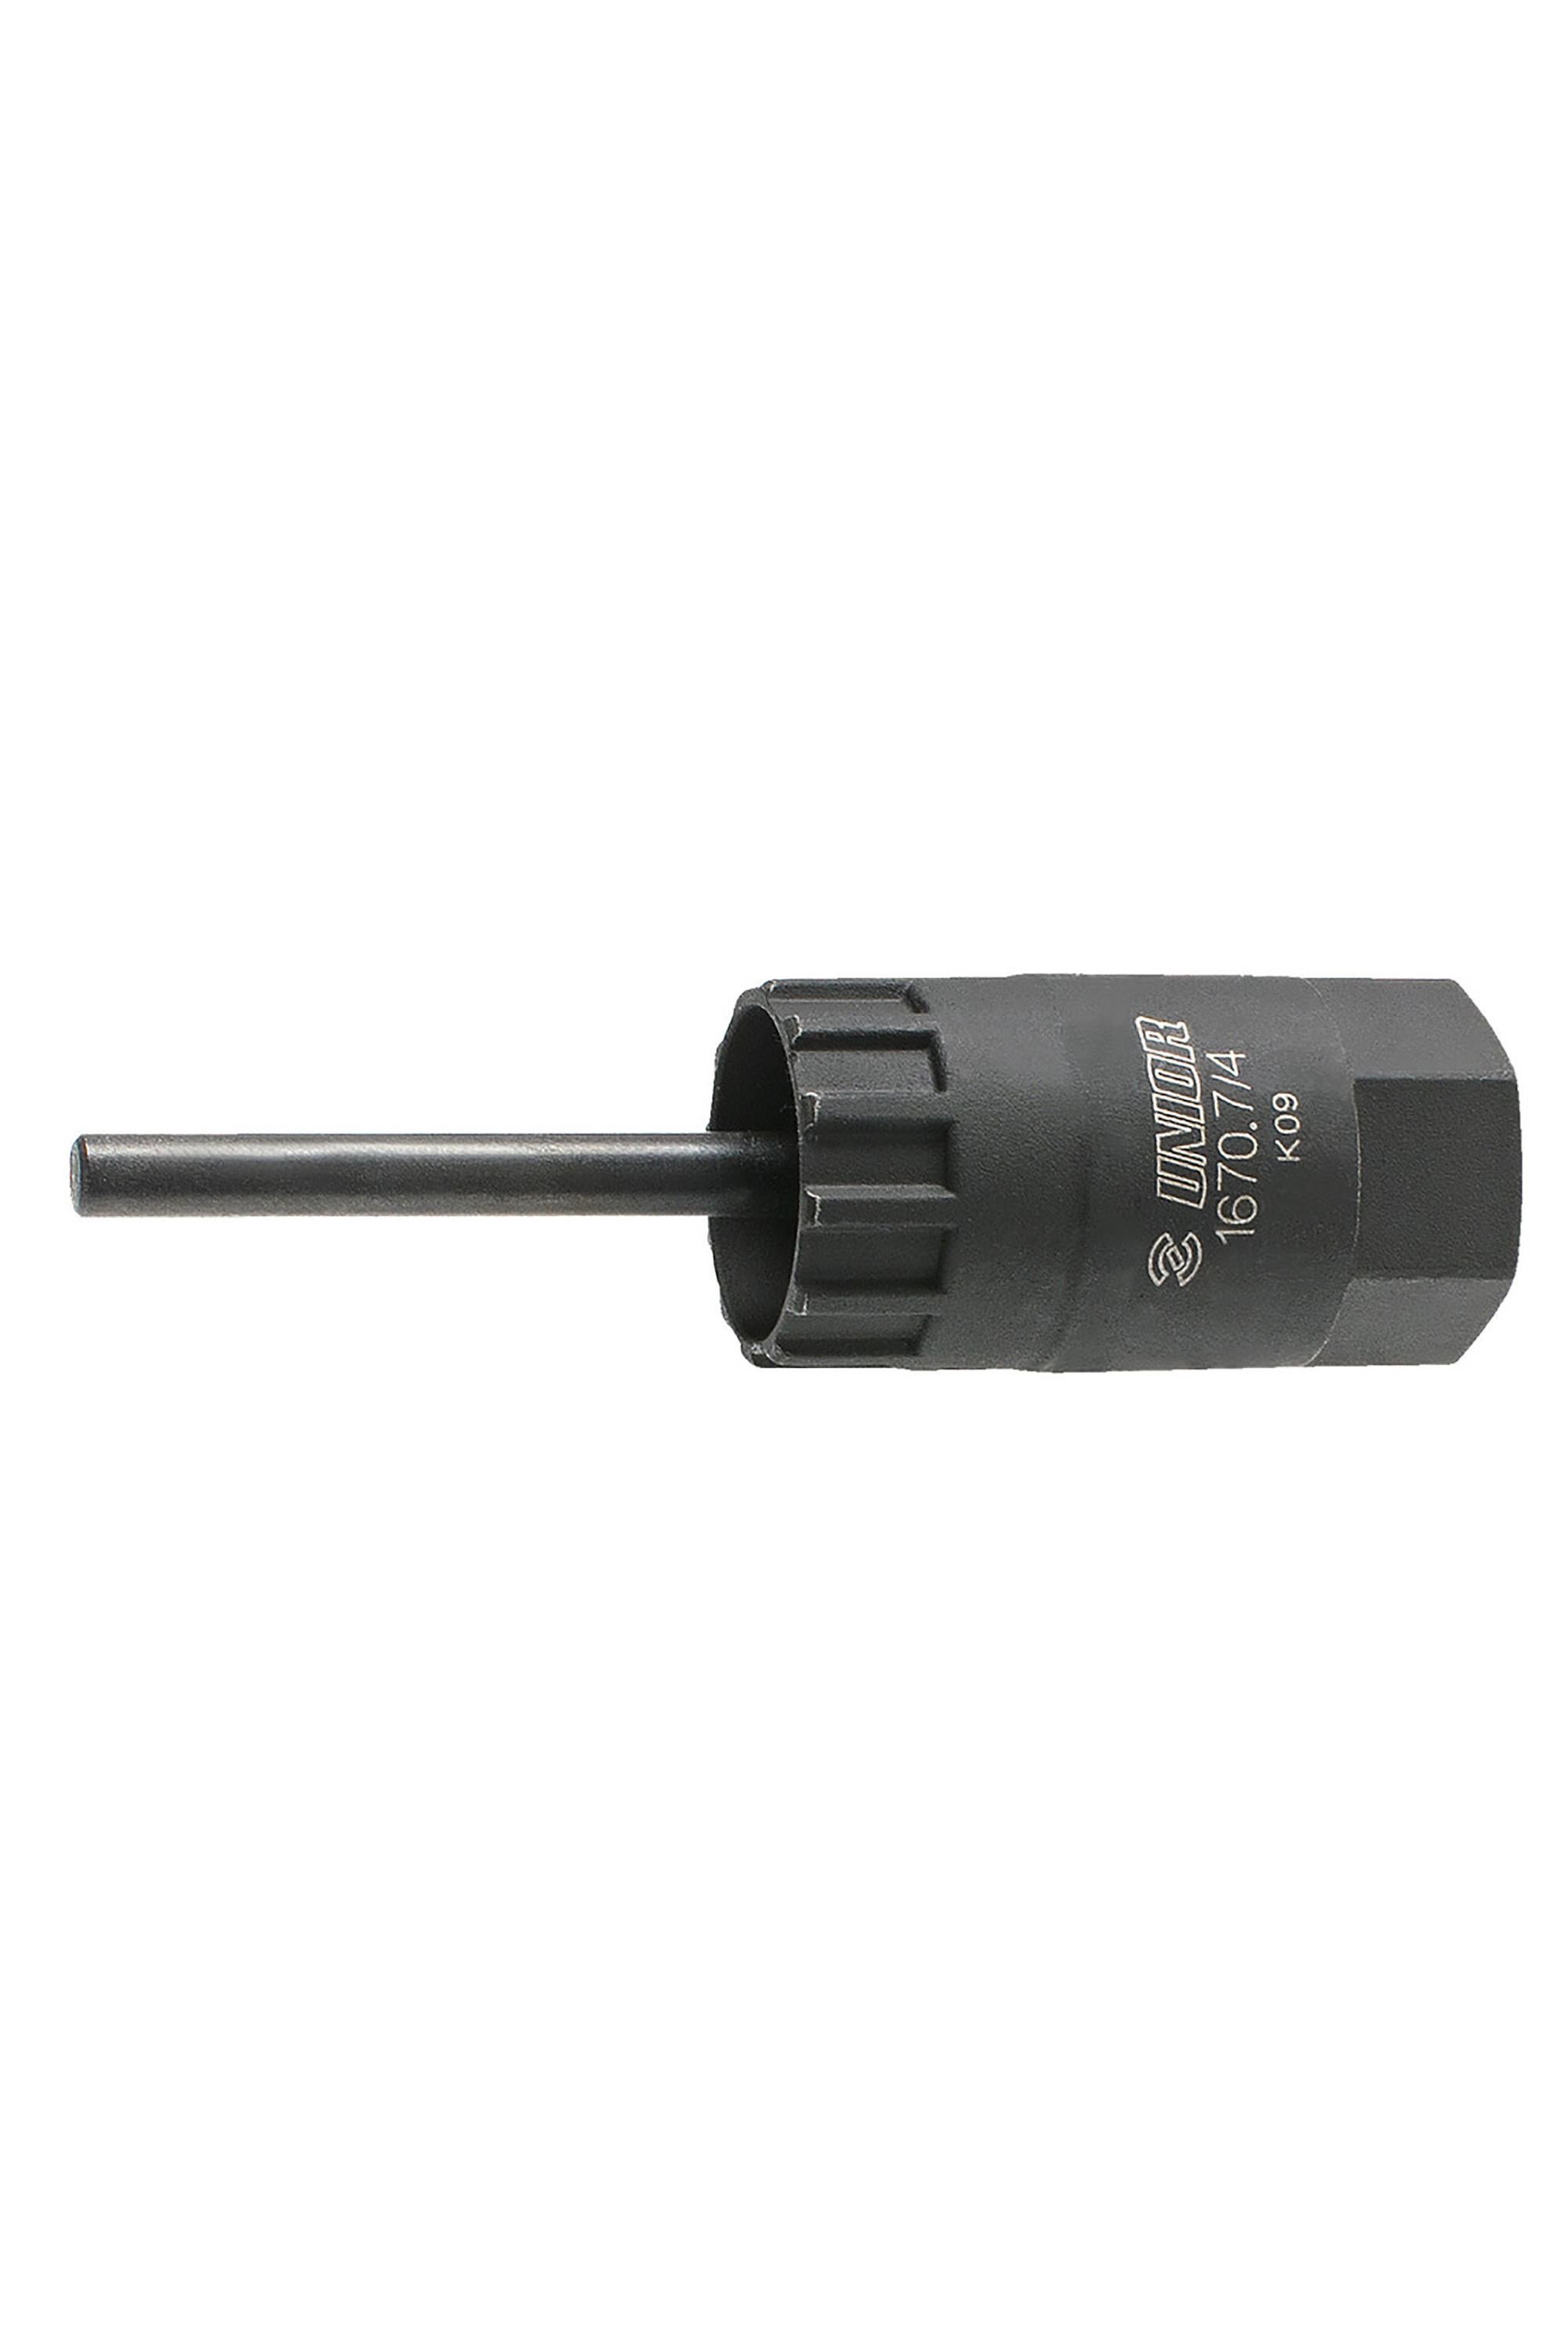 Cassette Lockring Tool With Guide -